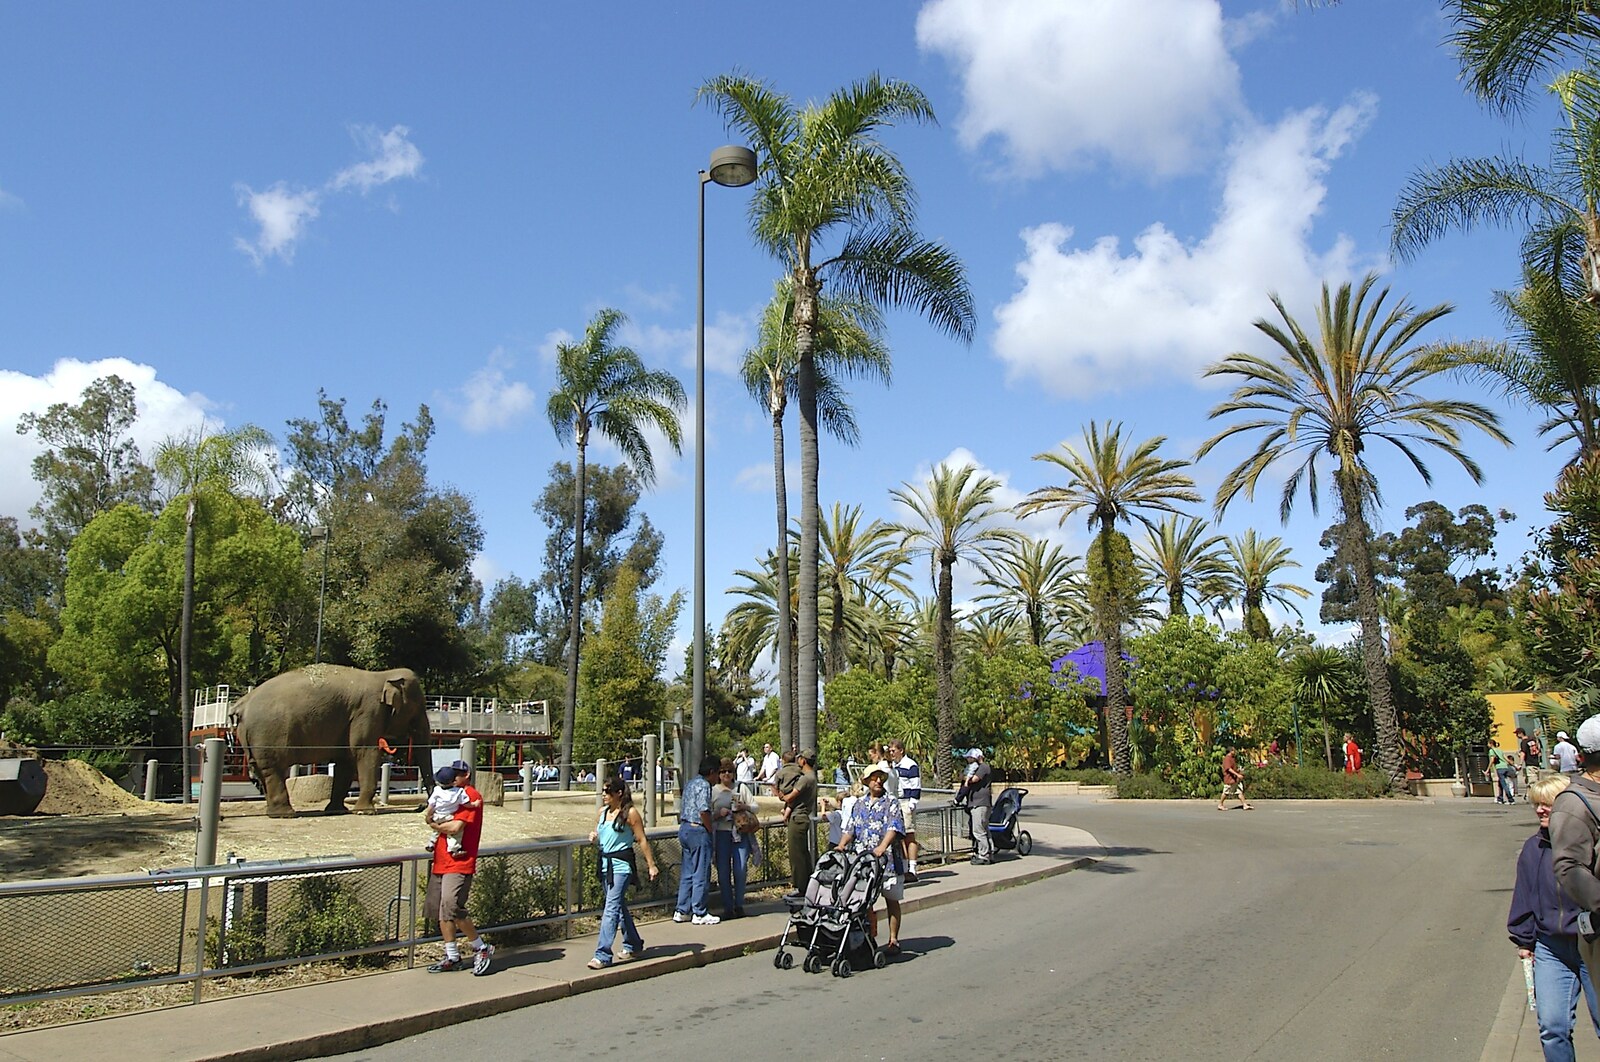 San Diego zoo from San Diego Seven: The Desert and the Dunes, Arizona and California, US - 22nd April